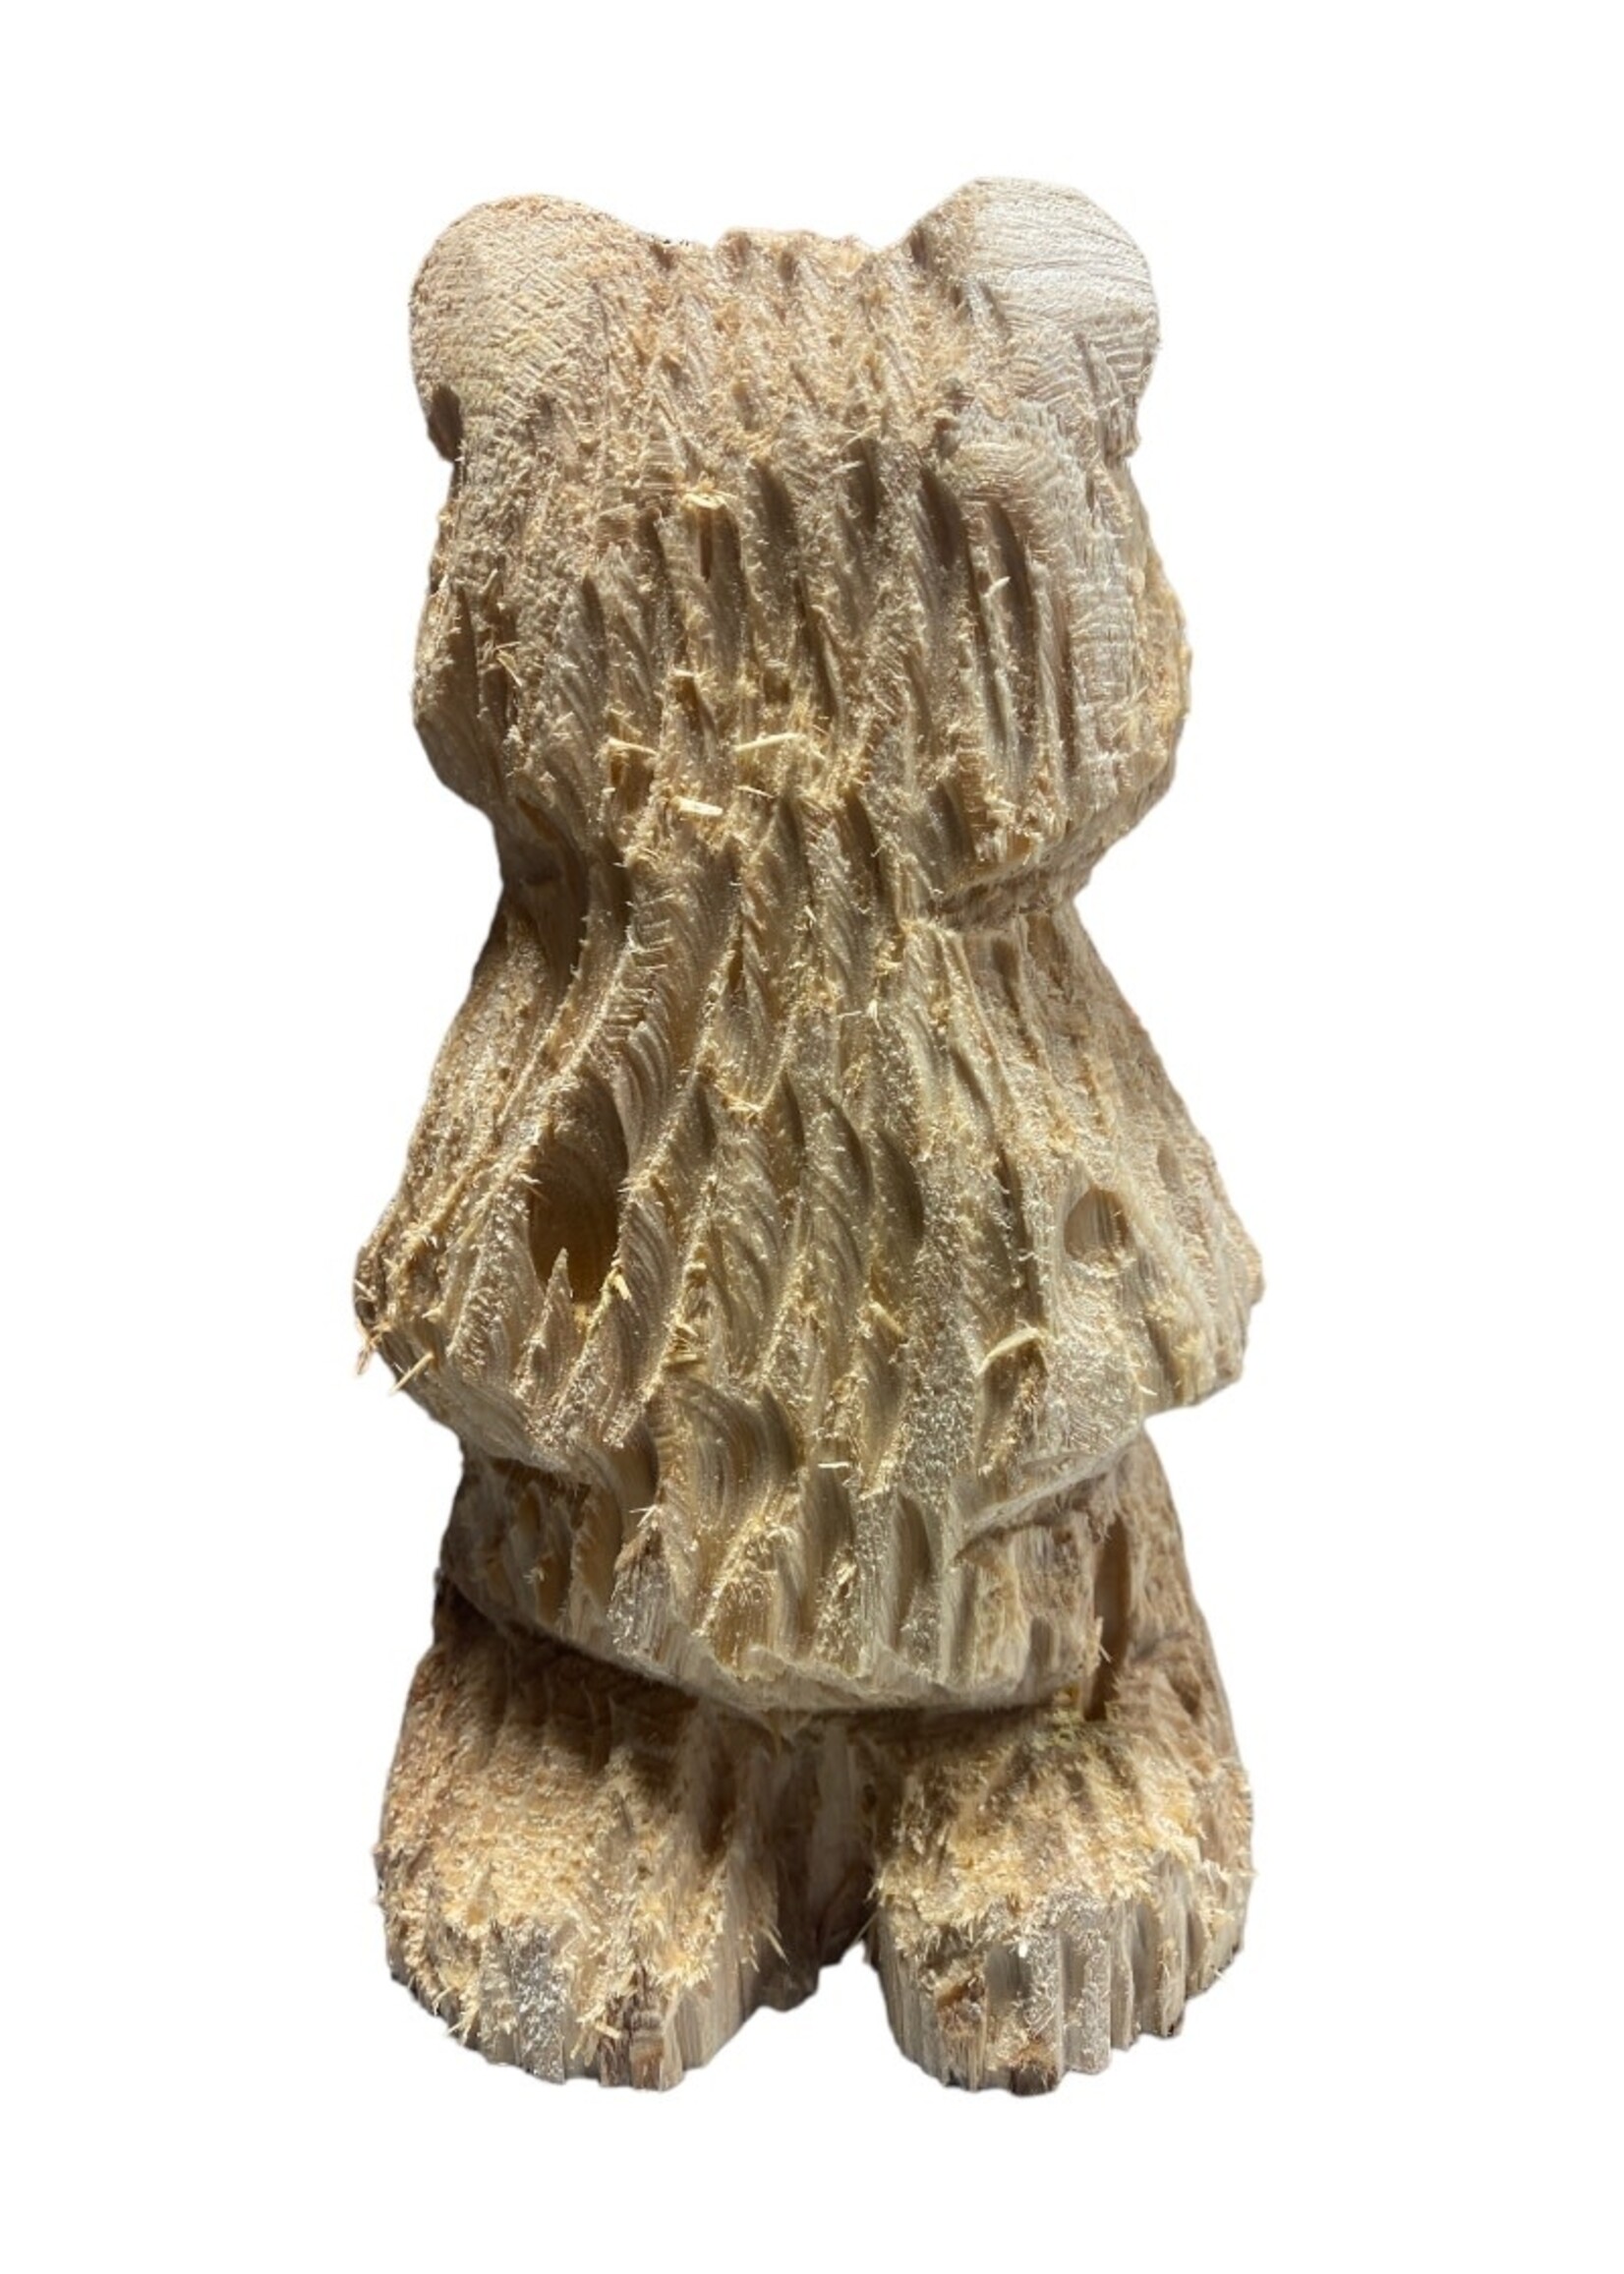 Made in Humboldt Standing Smiling Bear 8" (JT)